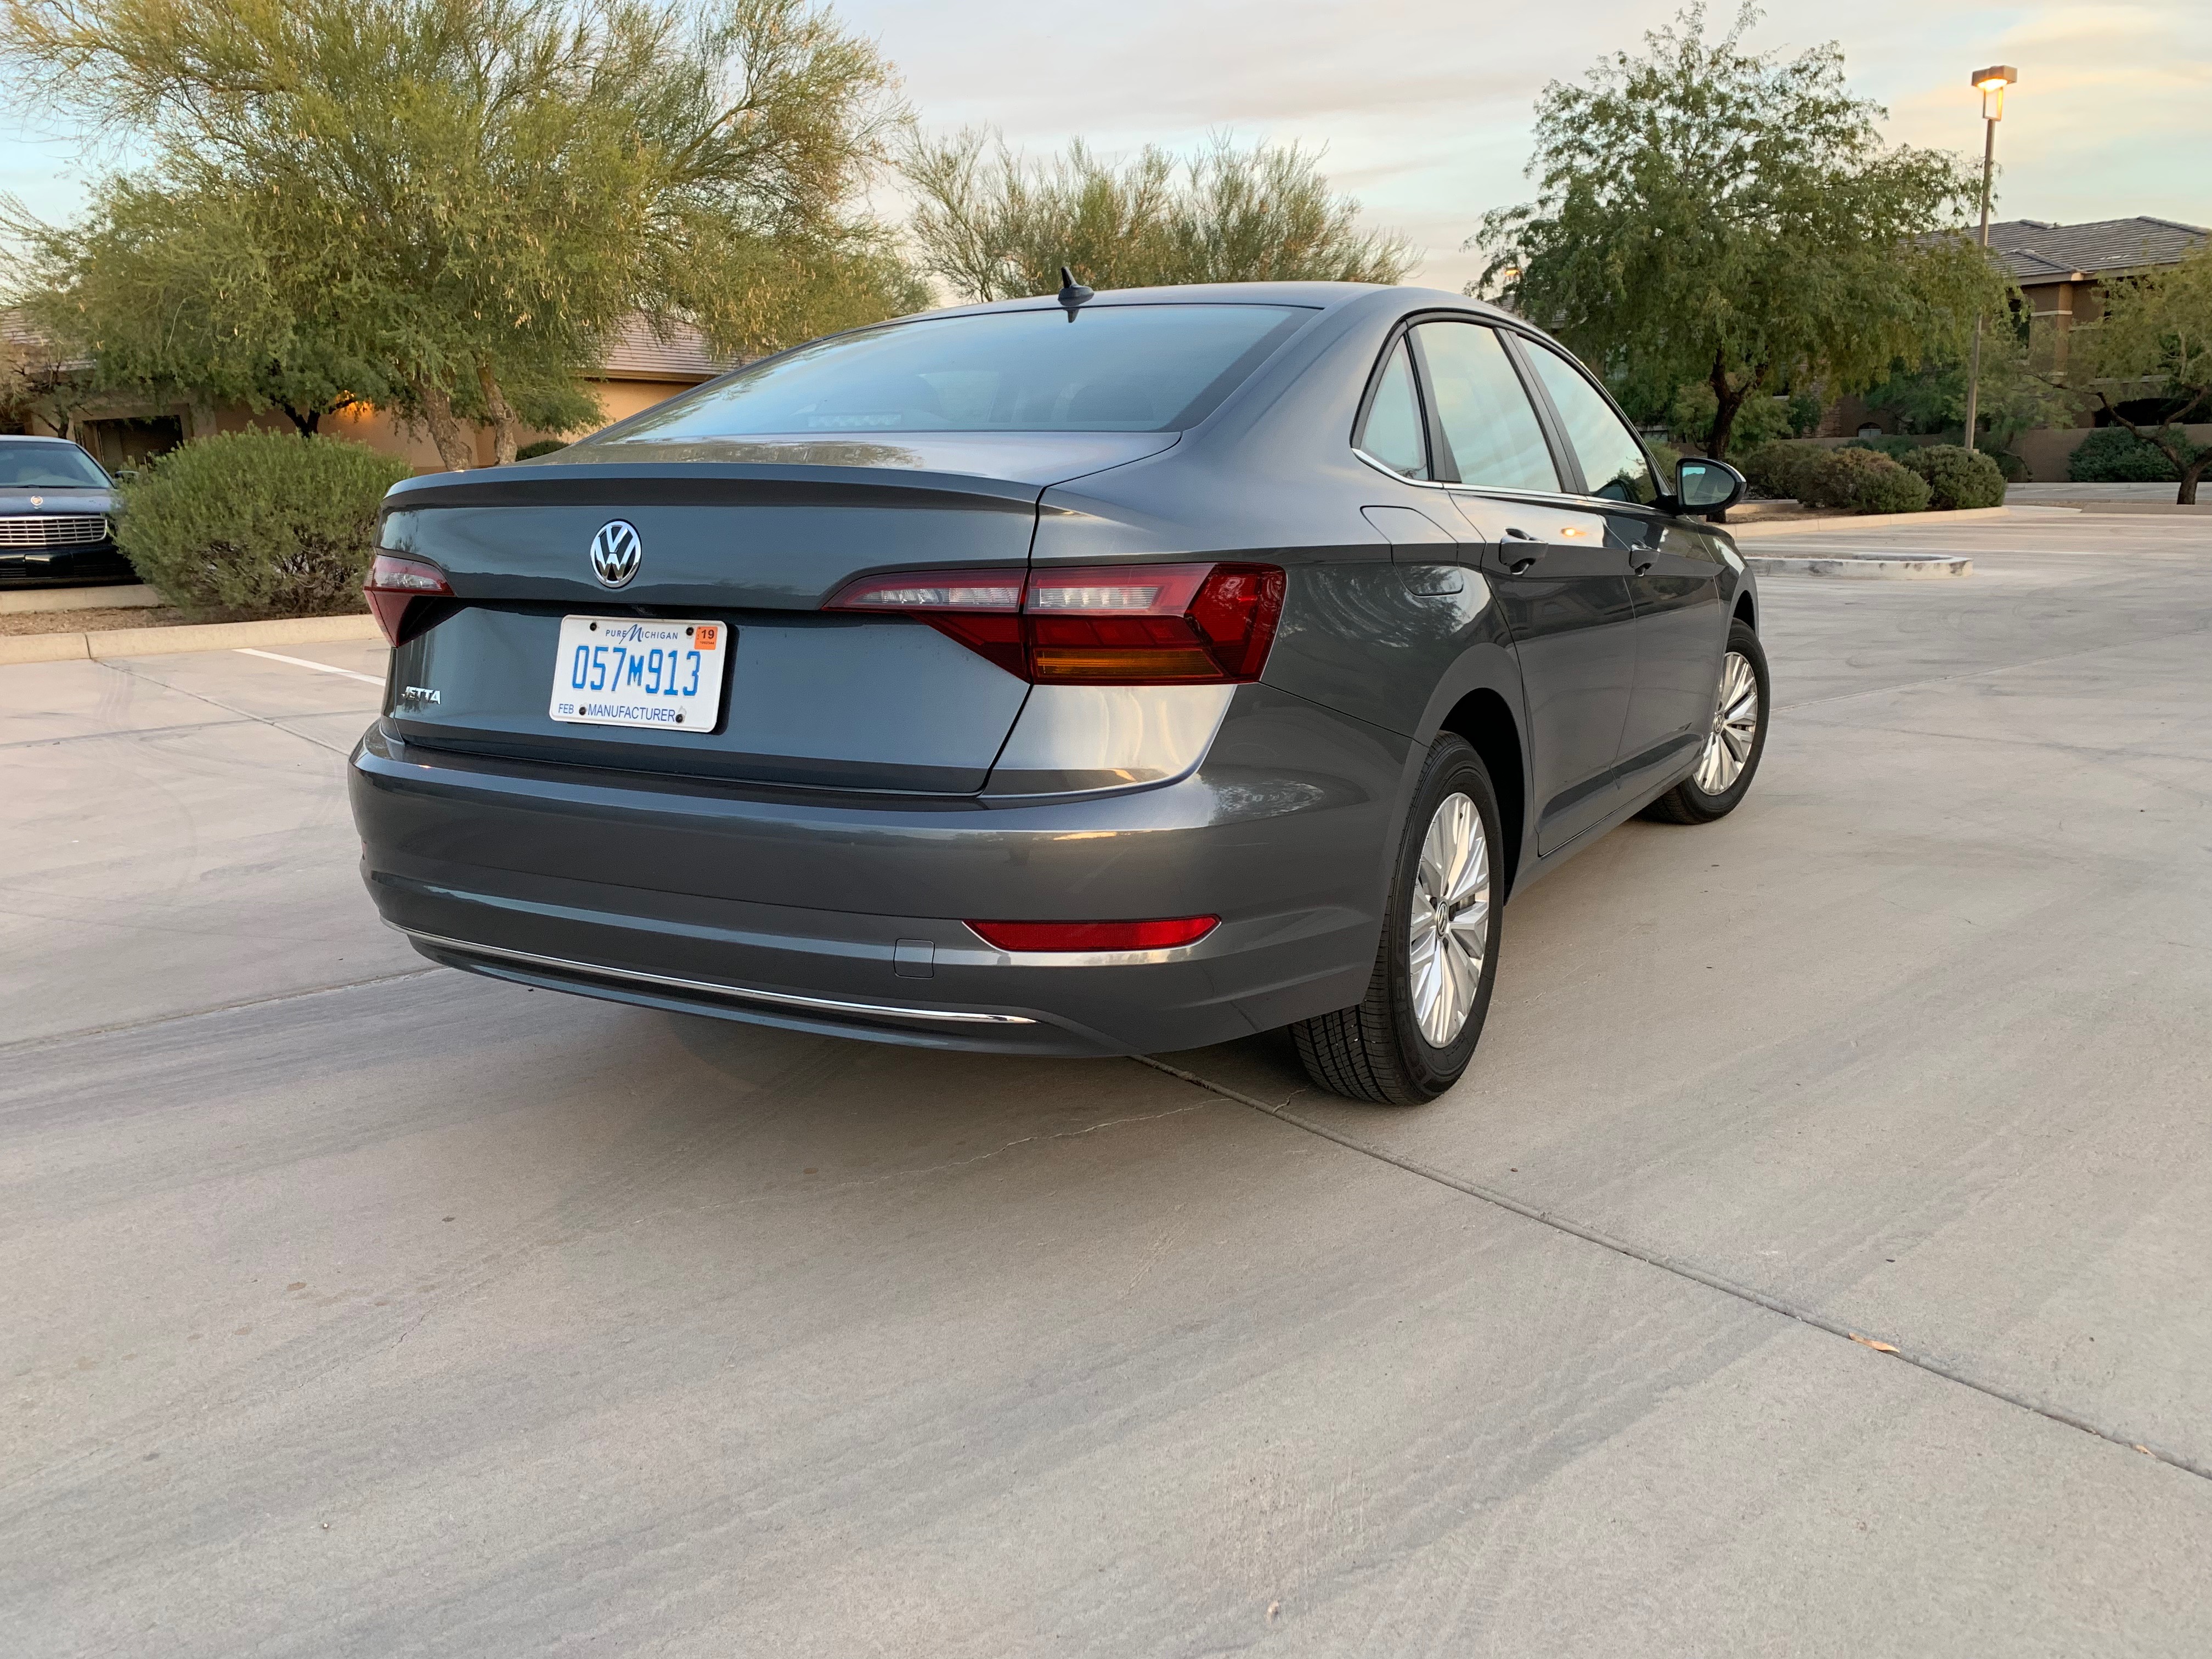 Rather than an edgy design, Volkswagen went for an understated look with the 2019 Jetta. | Carter Nacke photo